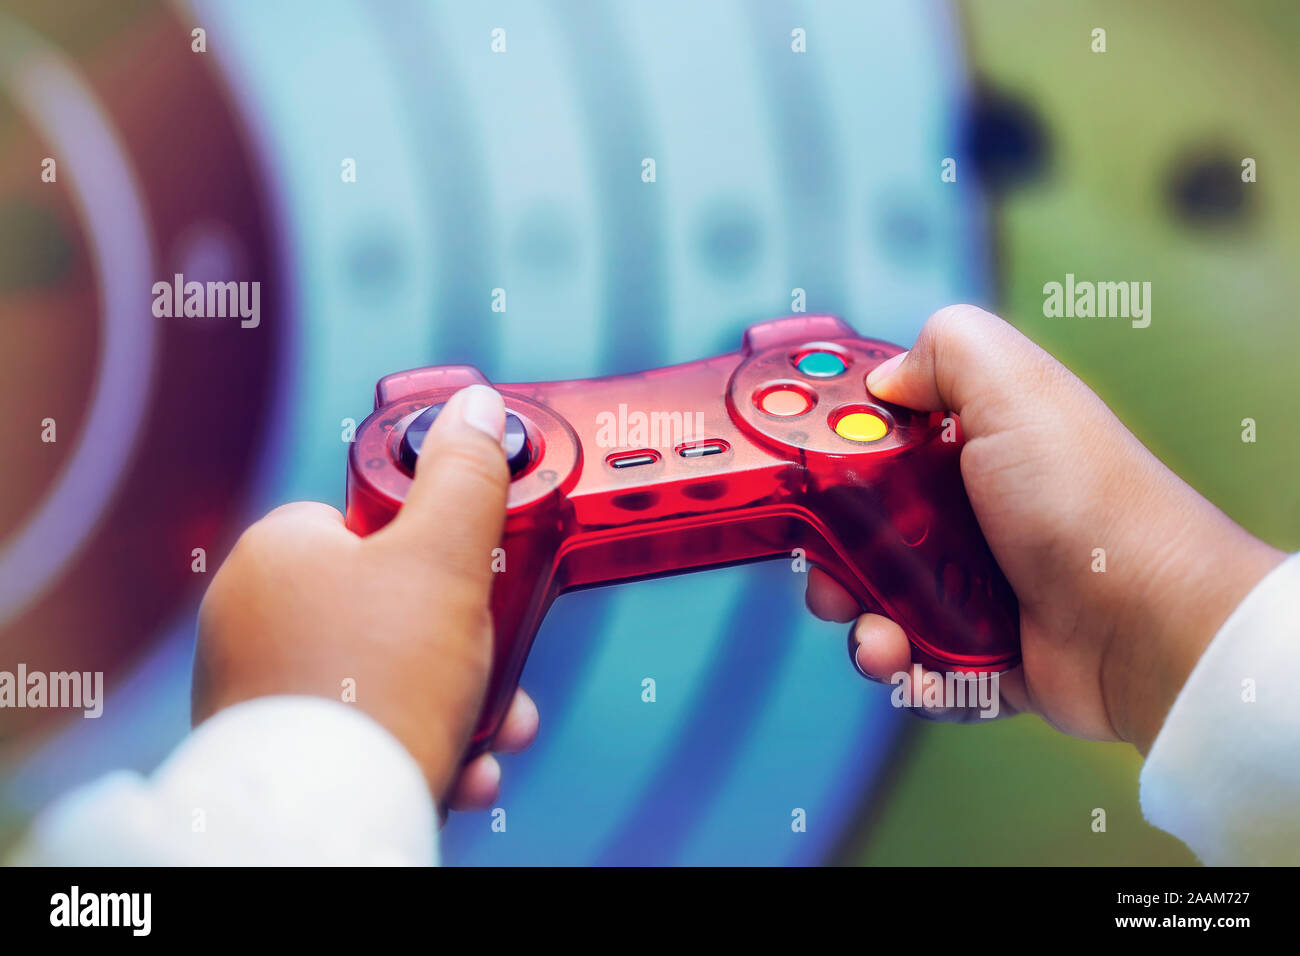 A child playing a shooting genre video game, close-up of the hands holding the controller and pushing buttons. Stock Photo